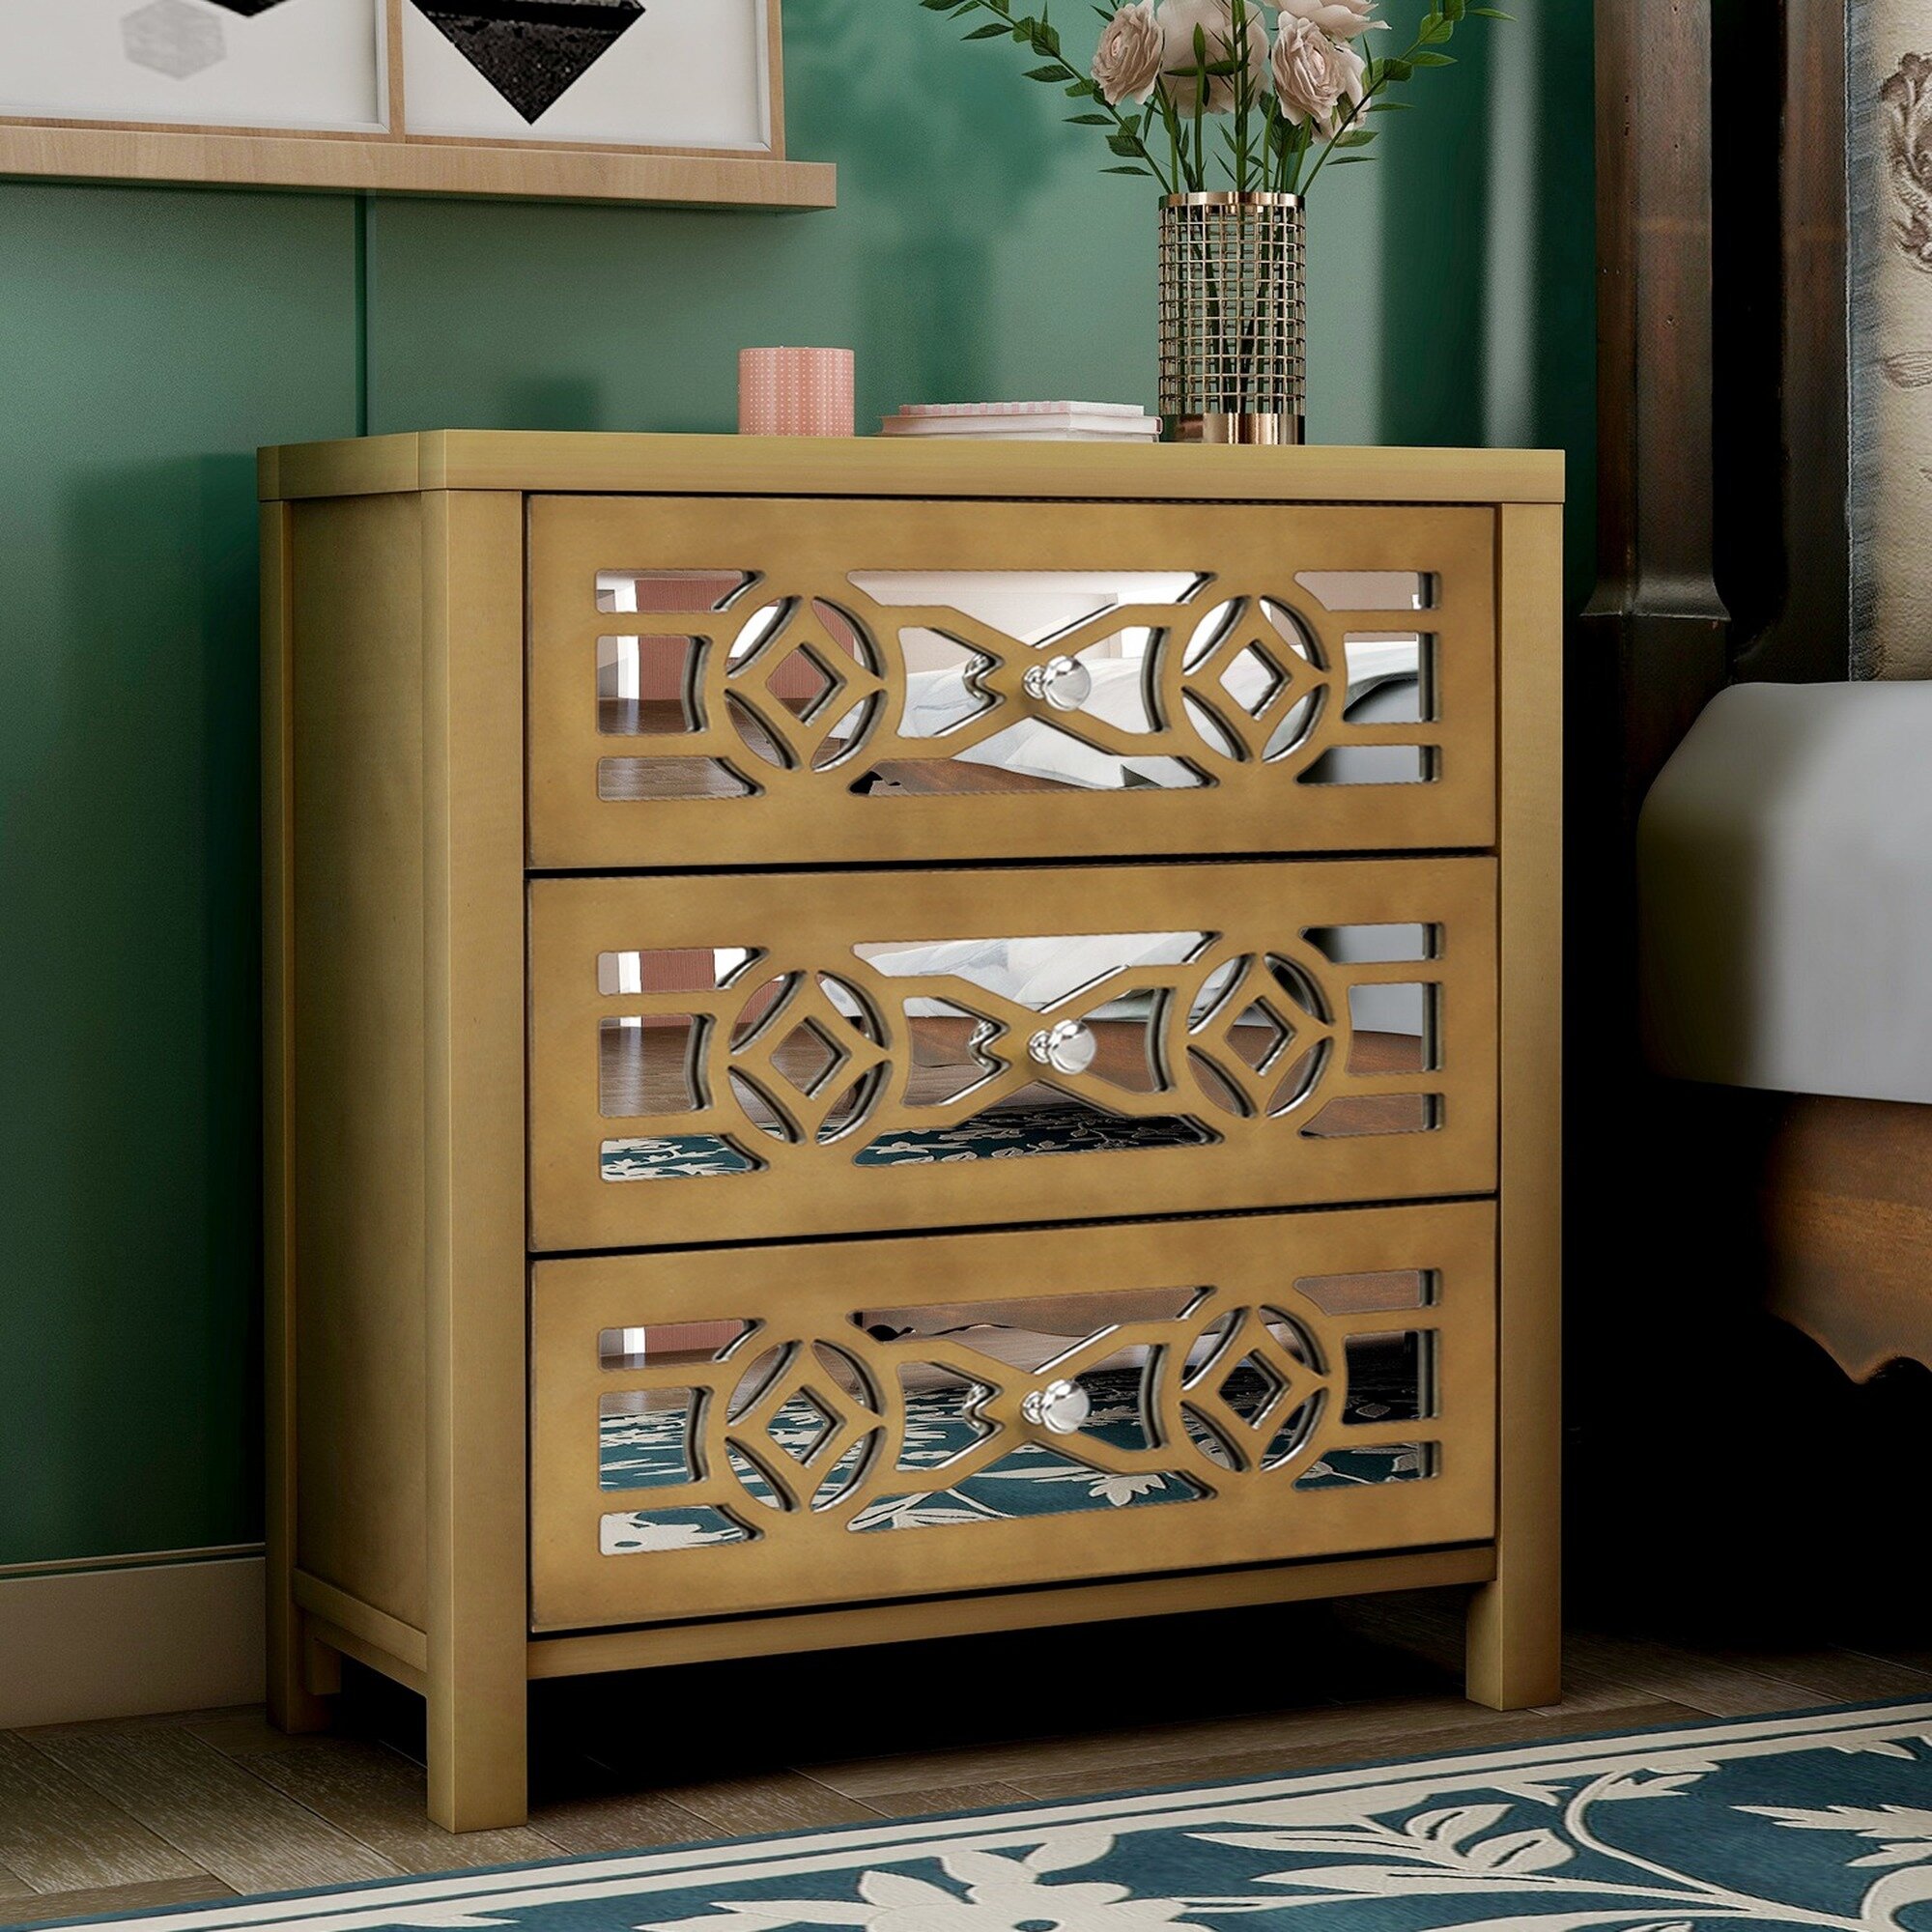 Details about   Chest Of Drawers Bedside Table Cabinet 5 Drawer Metal Handles Bedroom Furniture 